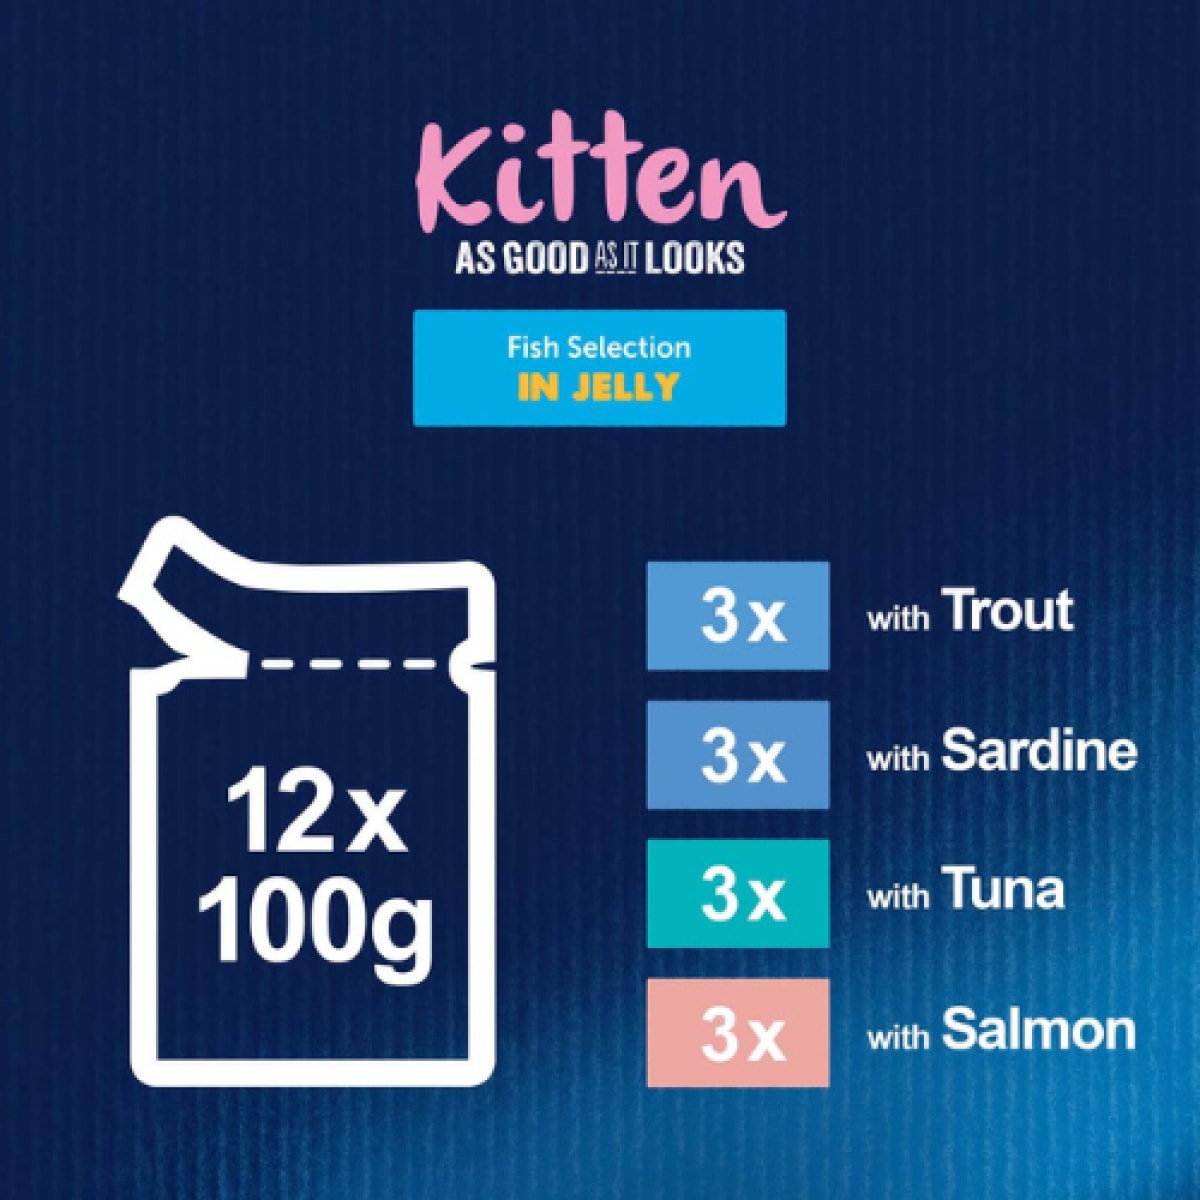 Felix As Good As it Looks Kitten - Fish Selection in Jelly 12 x 100g Main Image